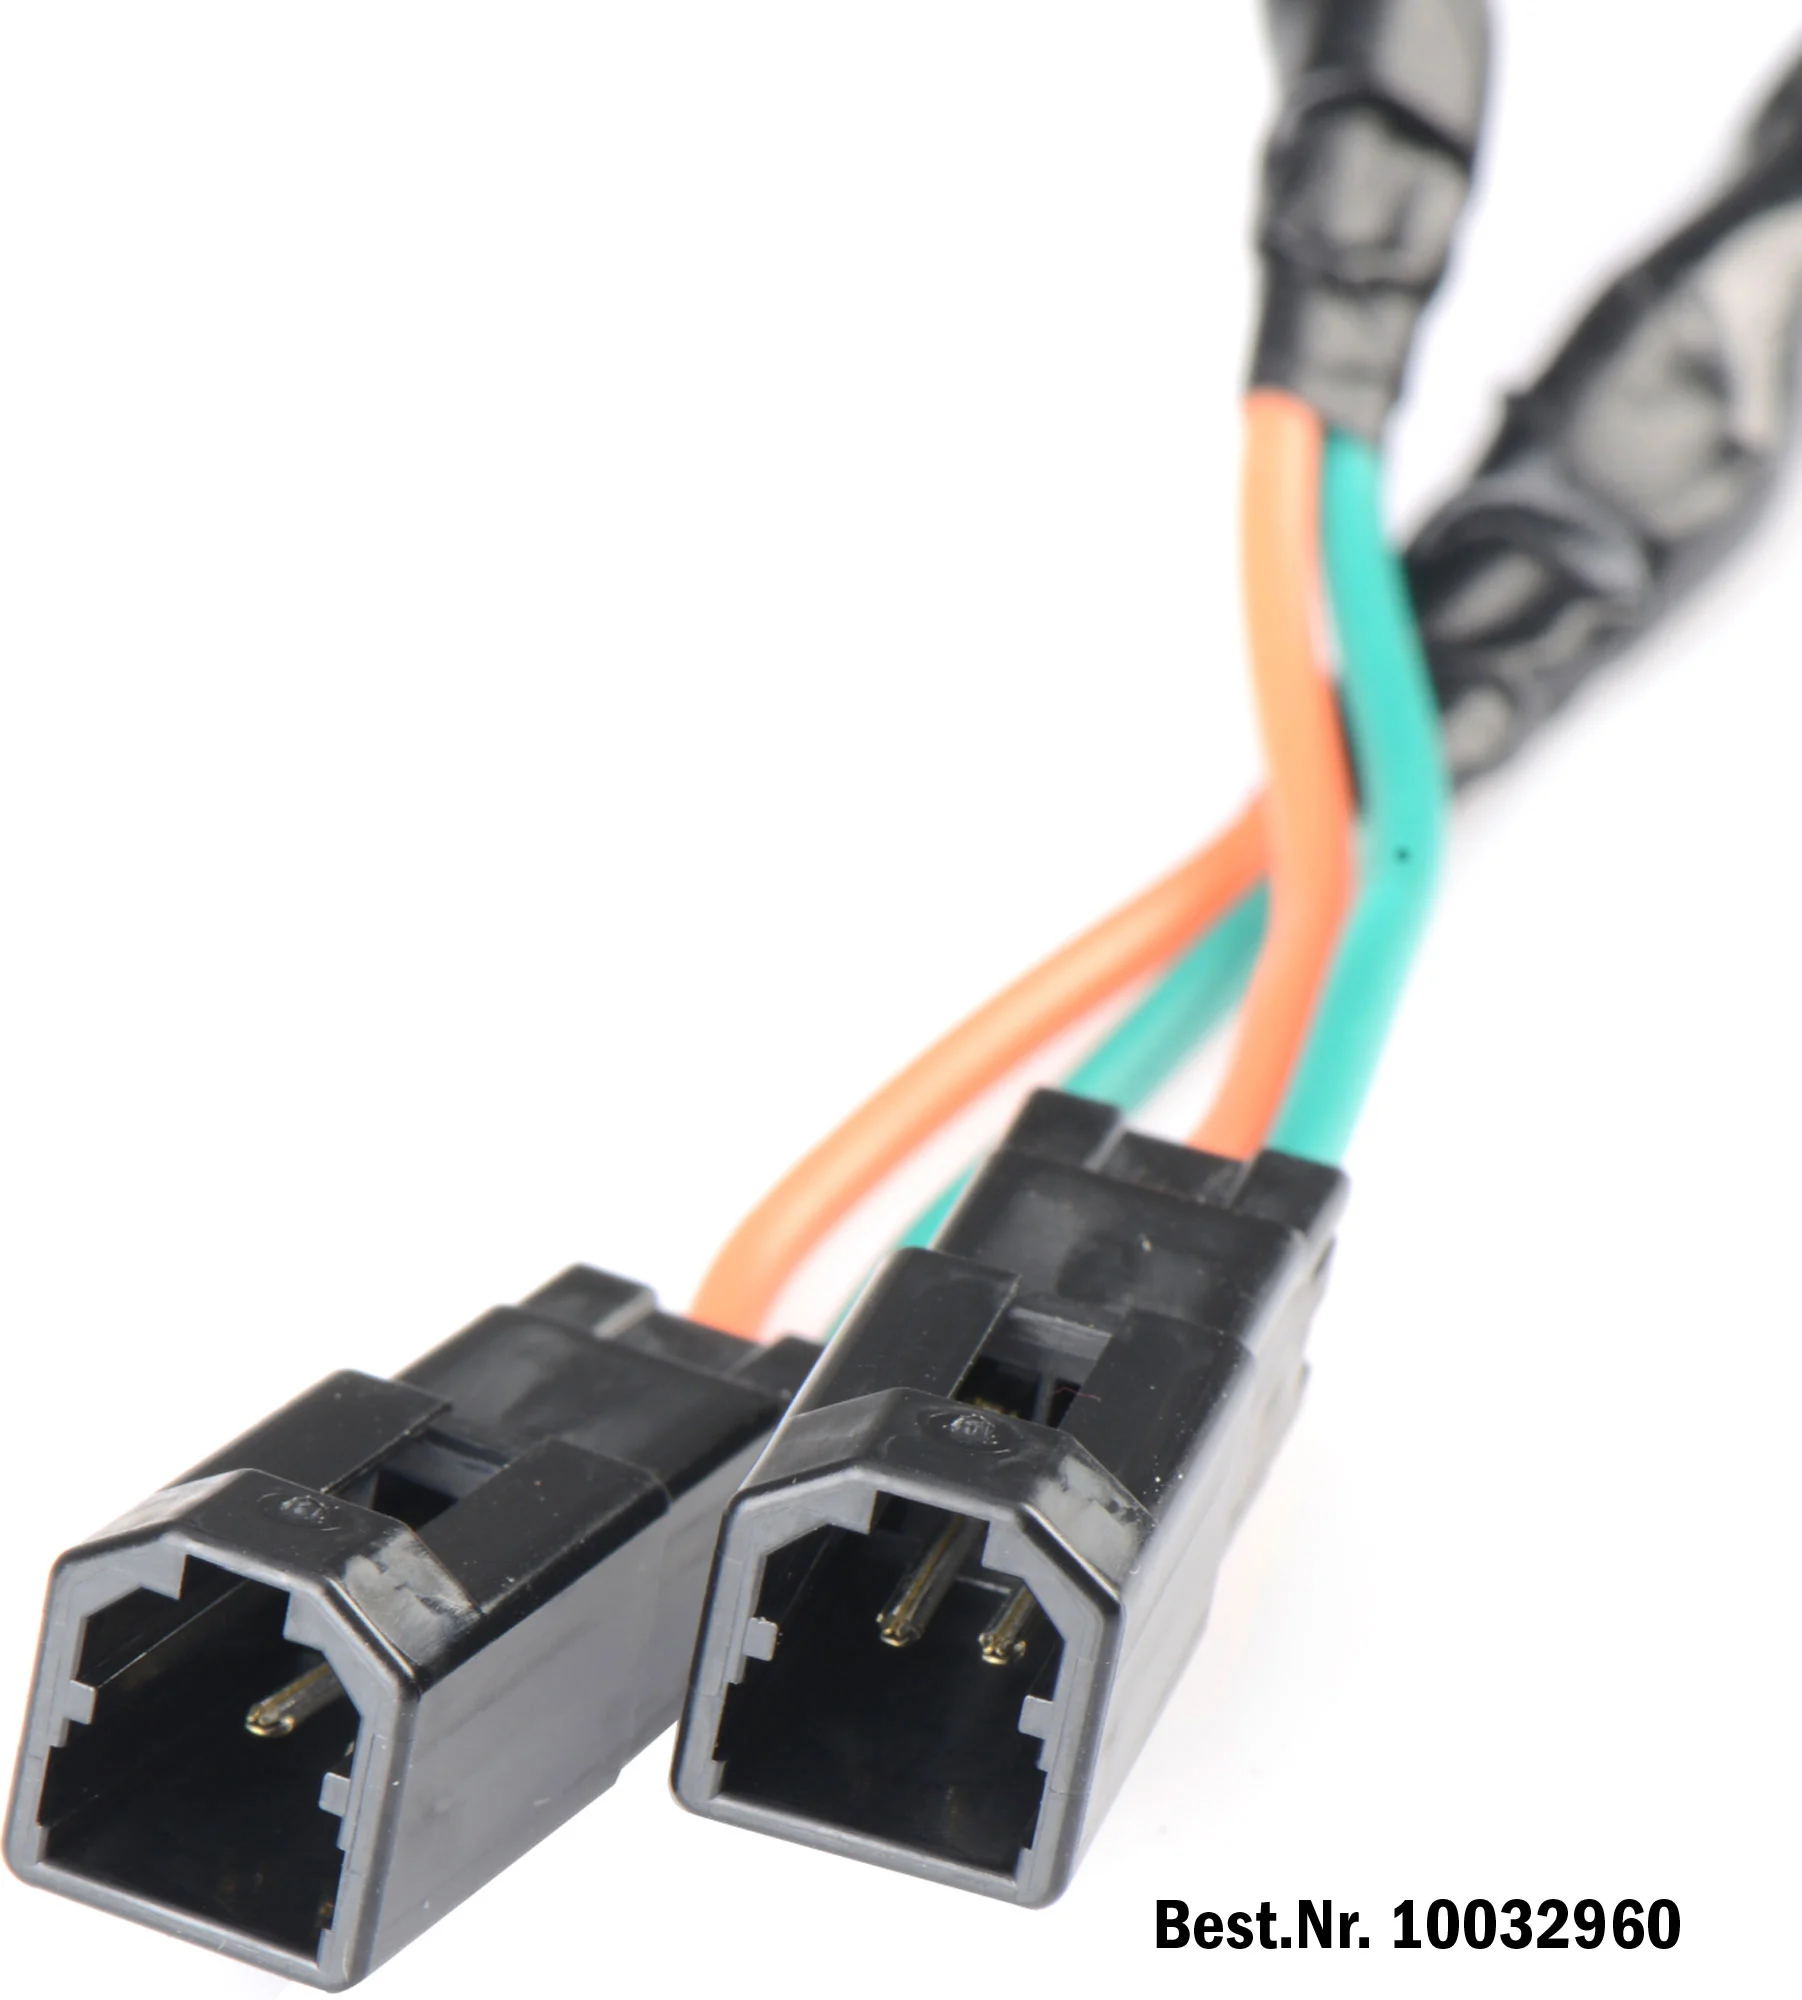 TURN SIGNAL ADAPTER CABLE